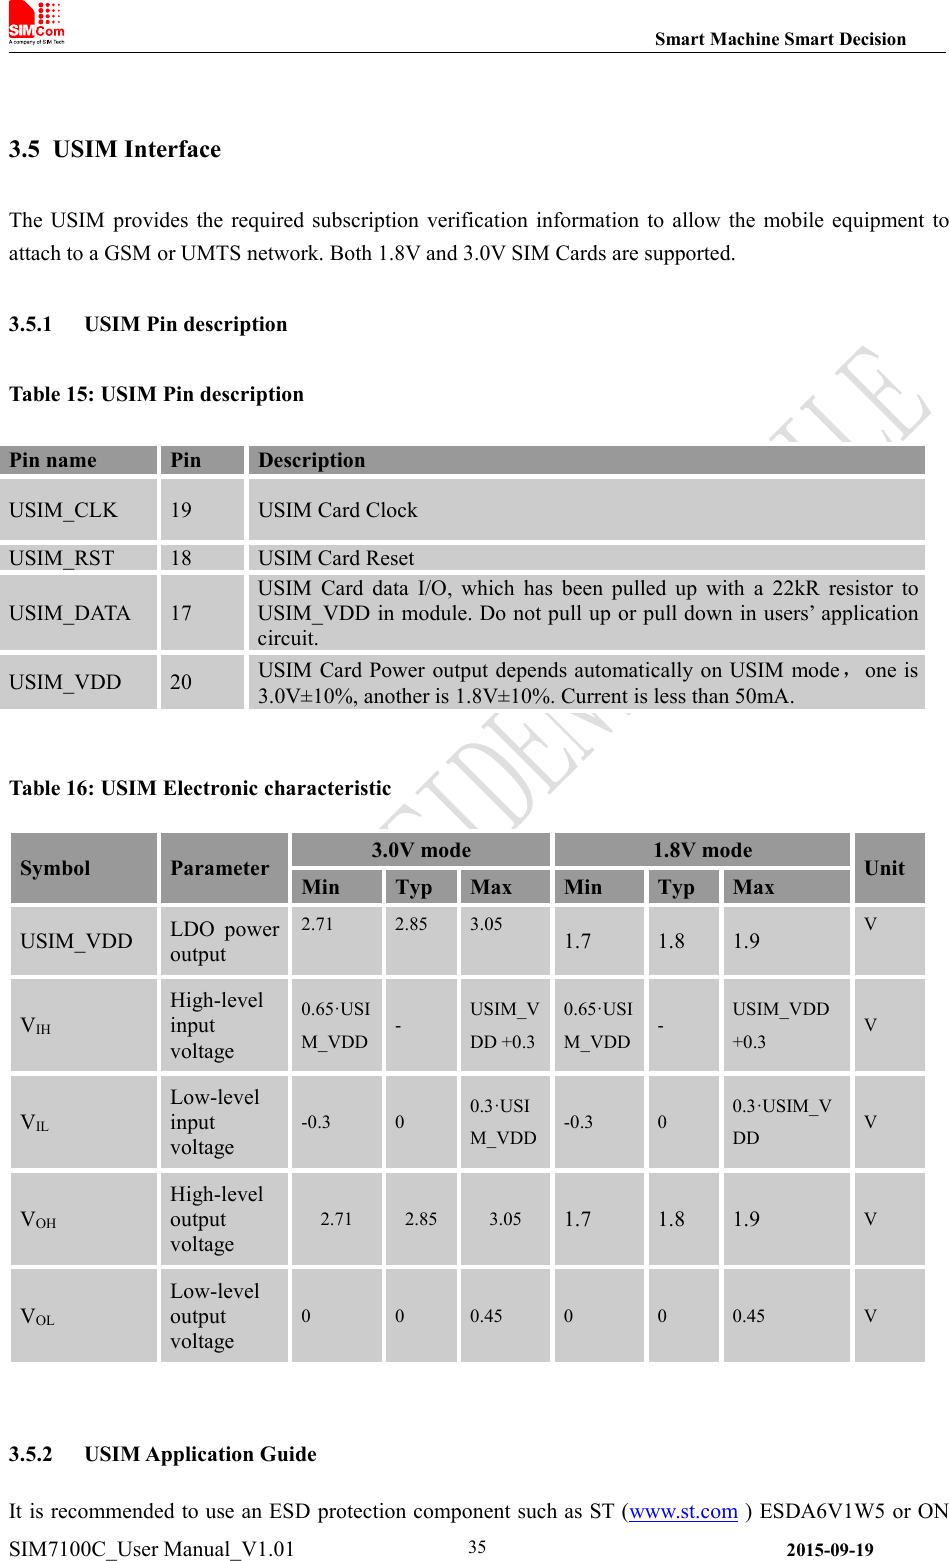 Smart Machine Smart DecisionSIM7100C_User Manual_V1.01 2015-09-19353.5 USIM InterfaceThe USIM provides the required subscription verification information to allow the mobile equipment toattach to a GSM or UMTS network. Both 1.8V and 3.0V SIM Cards are supported.3.5.1 USIM Pin descriptionTable 15: USIM Pin descriptionTable 16: USIM Electronic characteristicSymbolParameter3.0V mode1.8V modeUnitMinTypMaxMinTypMaxUSIM_VDDLDO poweroutput2.712.853.051.71.81.9VVIHHigh-levelinputvoltage0.65·USIM_VDD-USIM_VDD +0.30.65·USIM_VDD-USIM_VDD+0.3VVILLow-levelinputvoltage-0.300.3·USIM_VDD-0.300.3·USIM_VDDVVOHHigh-leveloutputvoltage2.712.853.051.71.81.9VVOLLow-leveloutputvoltage000.45000.45V3.5.2 USIM Application GuideIt is recommended to use an ESD protection component such as ST (www.st.com ) ESDA6V1W5 or ONPin namePinDescriptionUSIM_CLK19USIM Card ClockUSIM_RST18USIM Card ResetUSIM_DATA17USIM Card data I/O, which has been pulled up with a 22kR resistor toUSIM_VDD in module. Do not pull up or pull down in users’ applicationcircuit.USIM_VDD20USIM Card Power output depends automatically on USIM mode，one is3.0V±10%, another is 1.8V±10%. Current is less than 50mA.